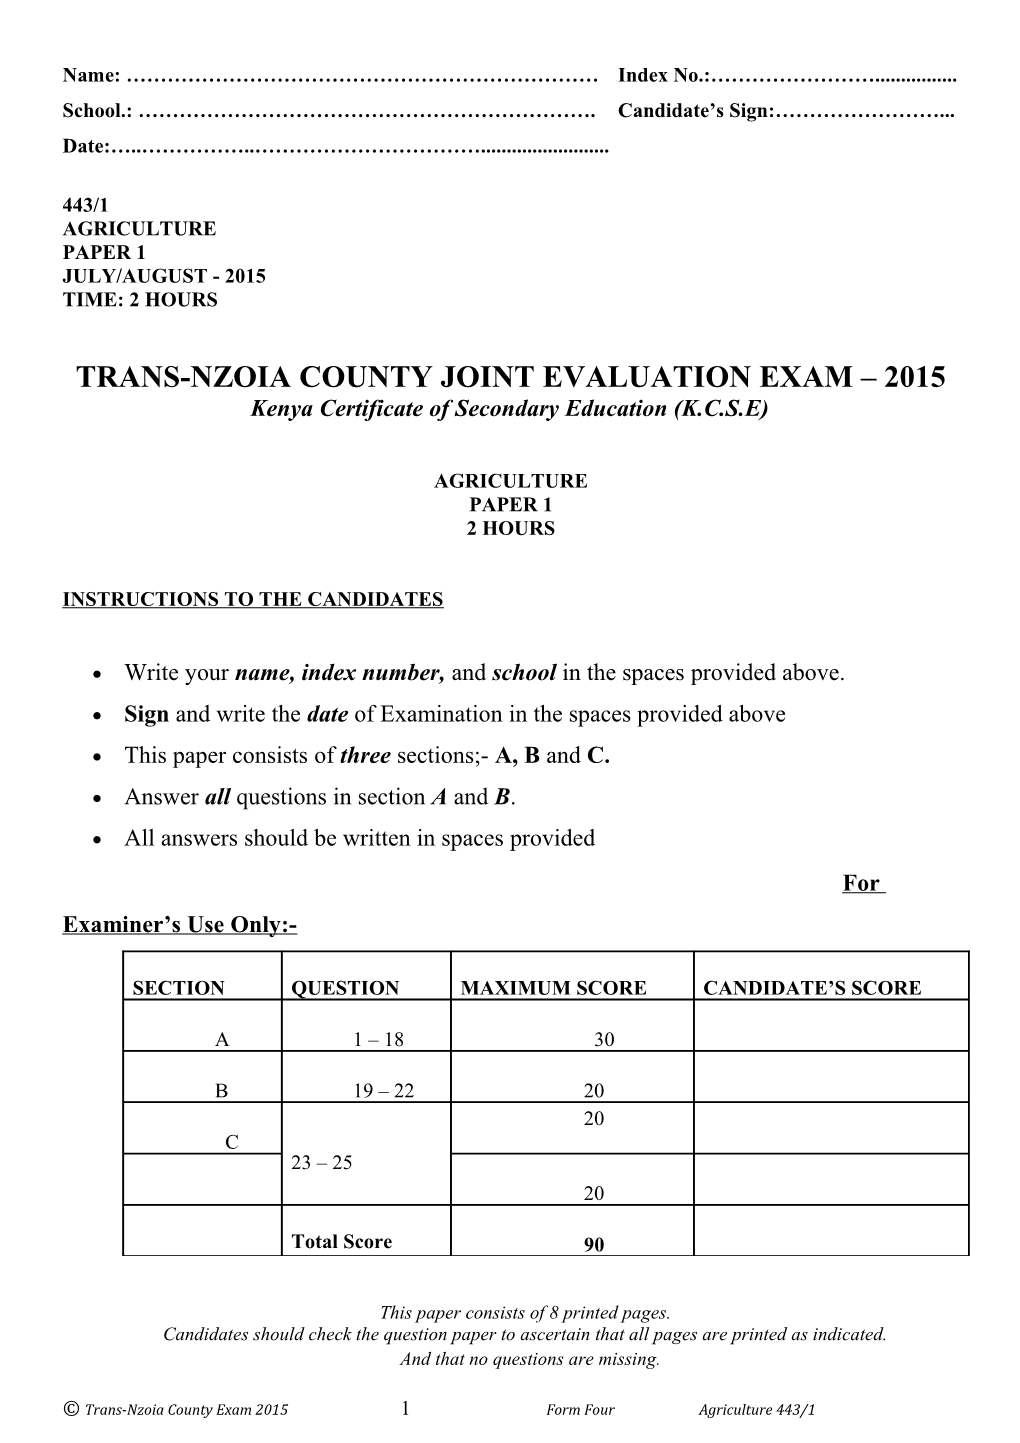 Trans-Nzoia County Joint Evaluation Exam 2015 s2